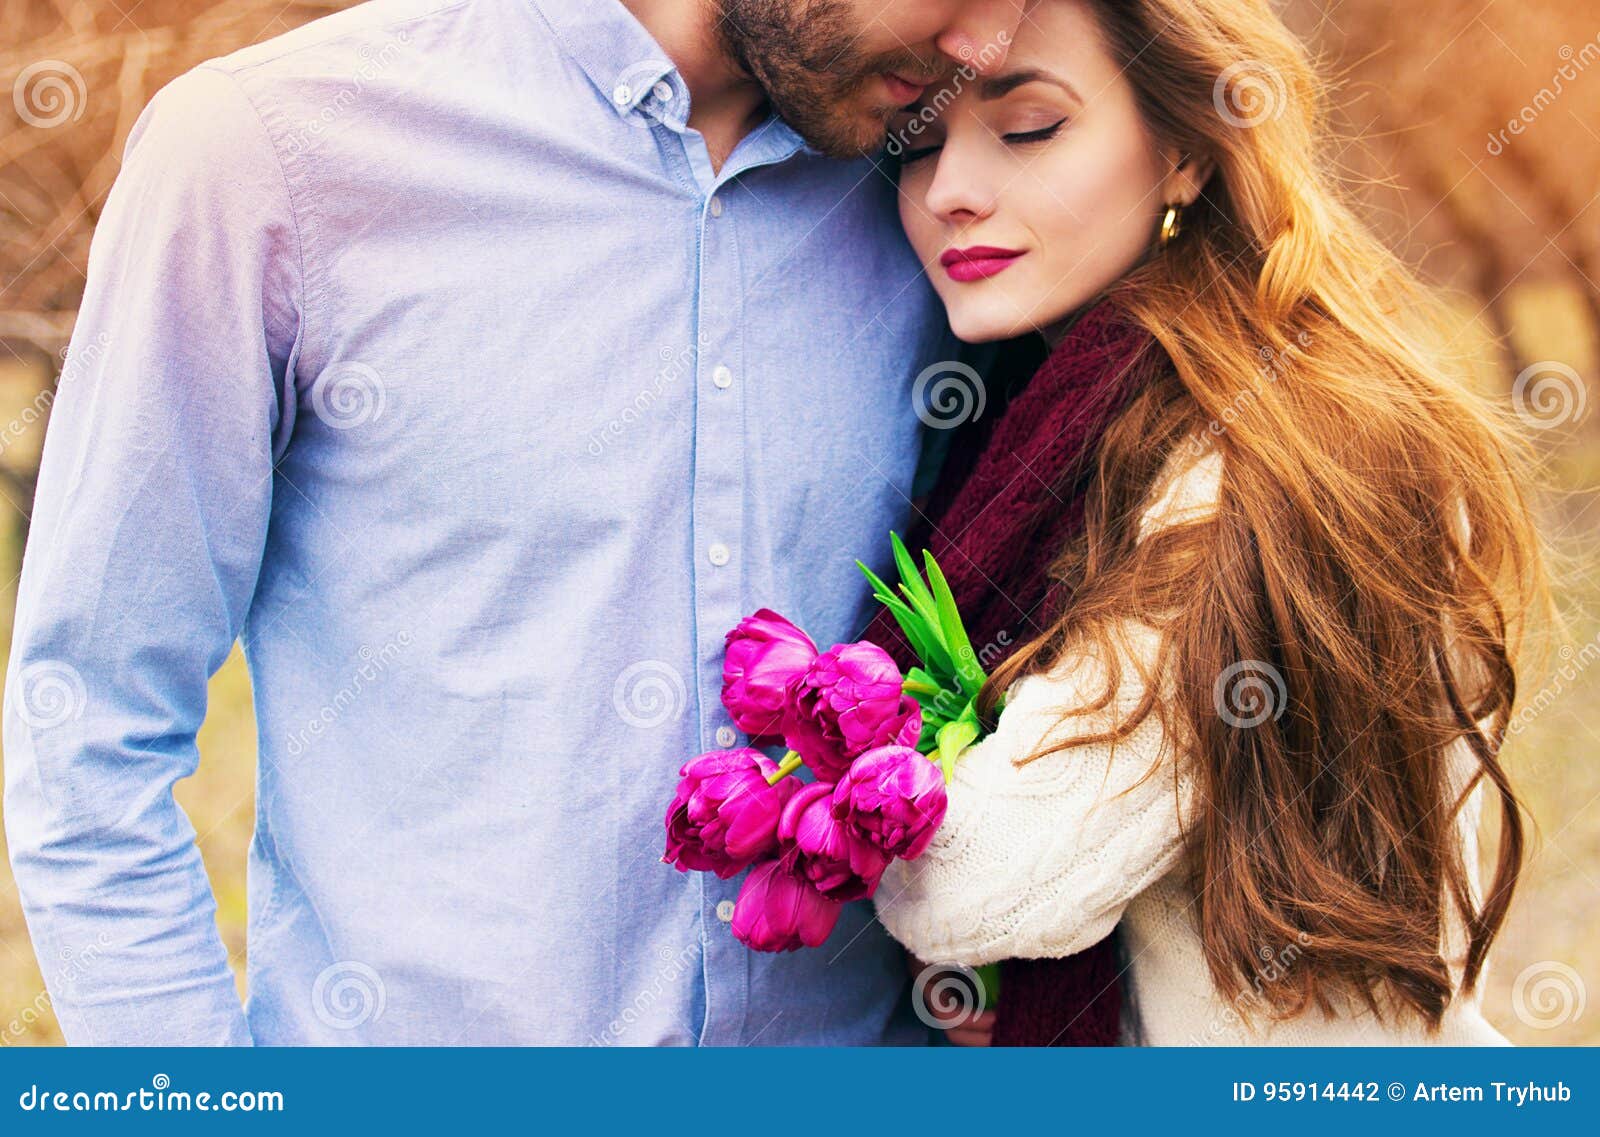 796,038 Romantic Couple Stock Photos - Free & Royalty-Free Stock Photos  from Dreamstime